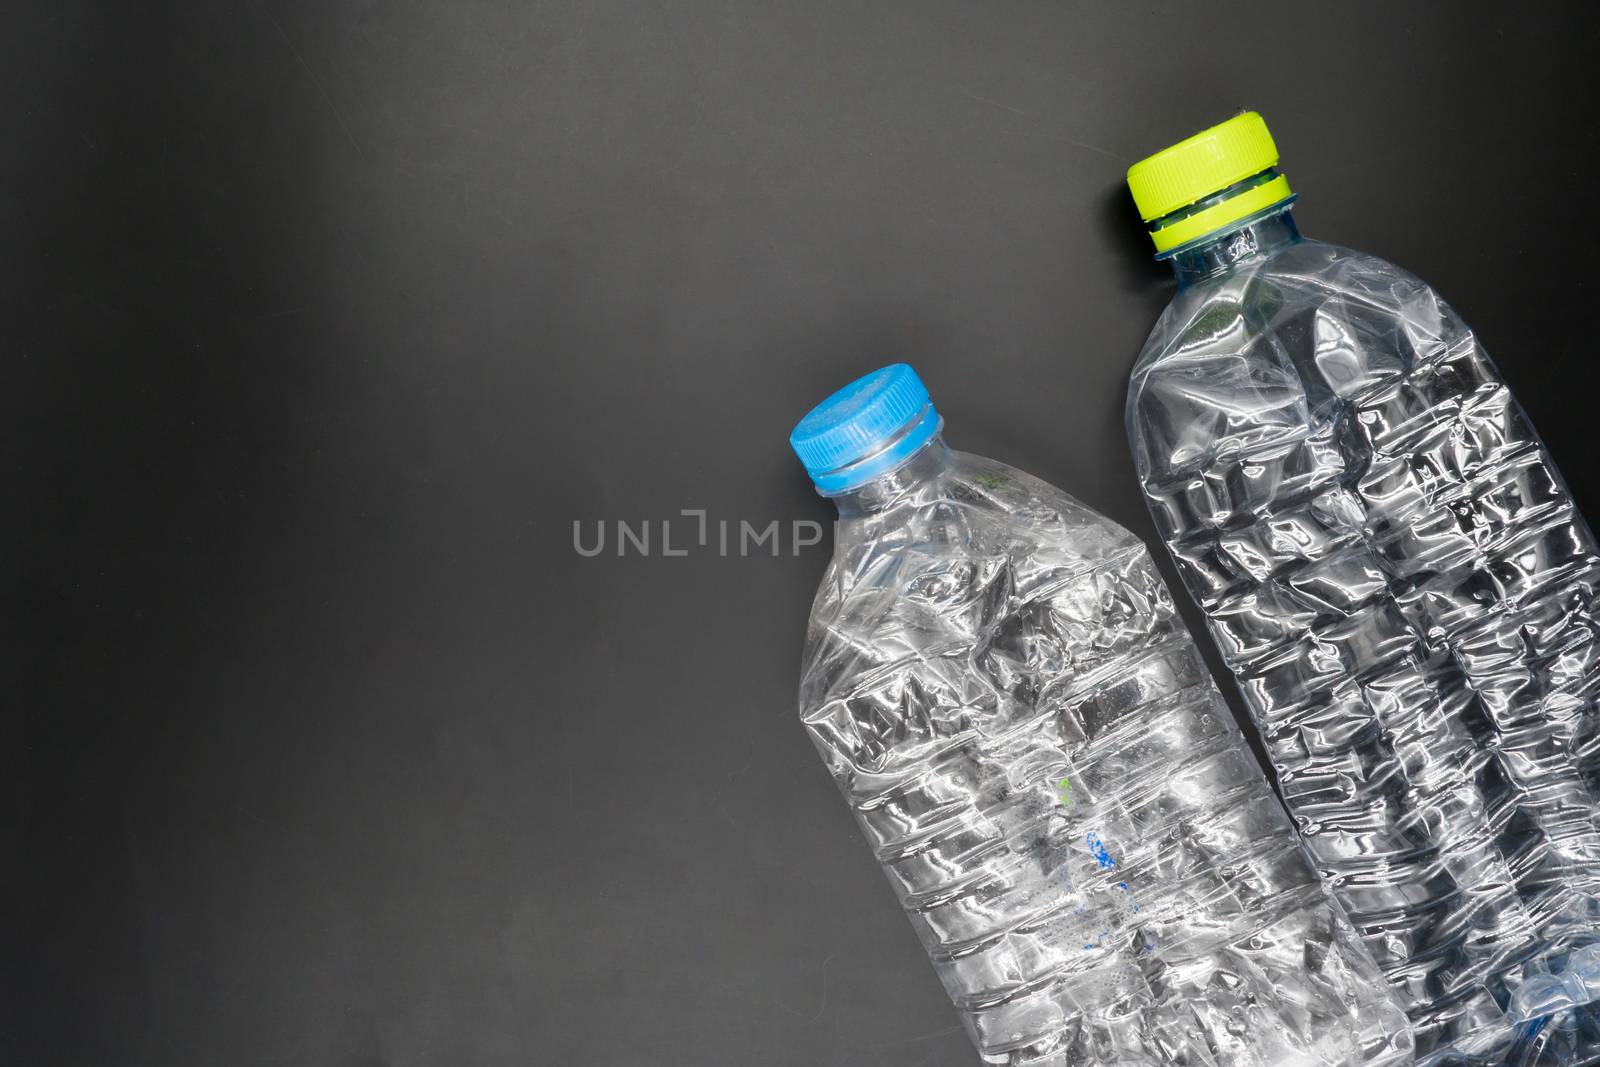 Empty plastic bottles are recyclable waste. by ronnarong